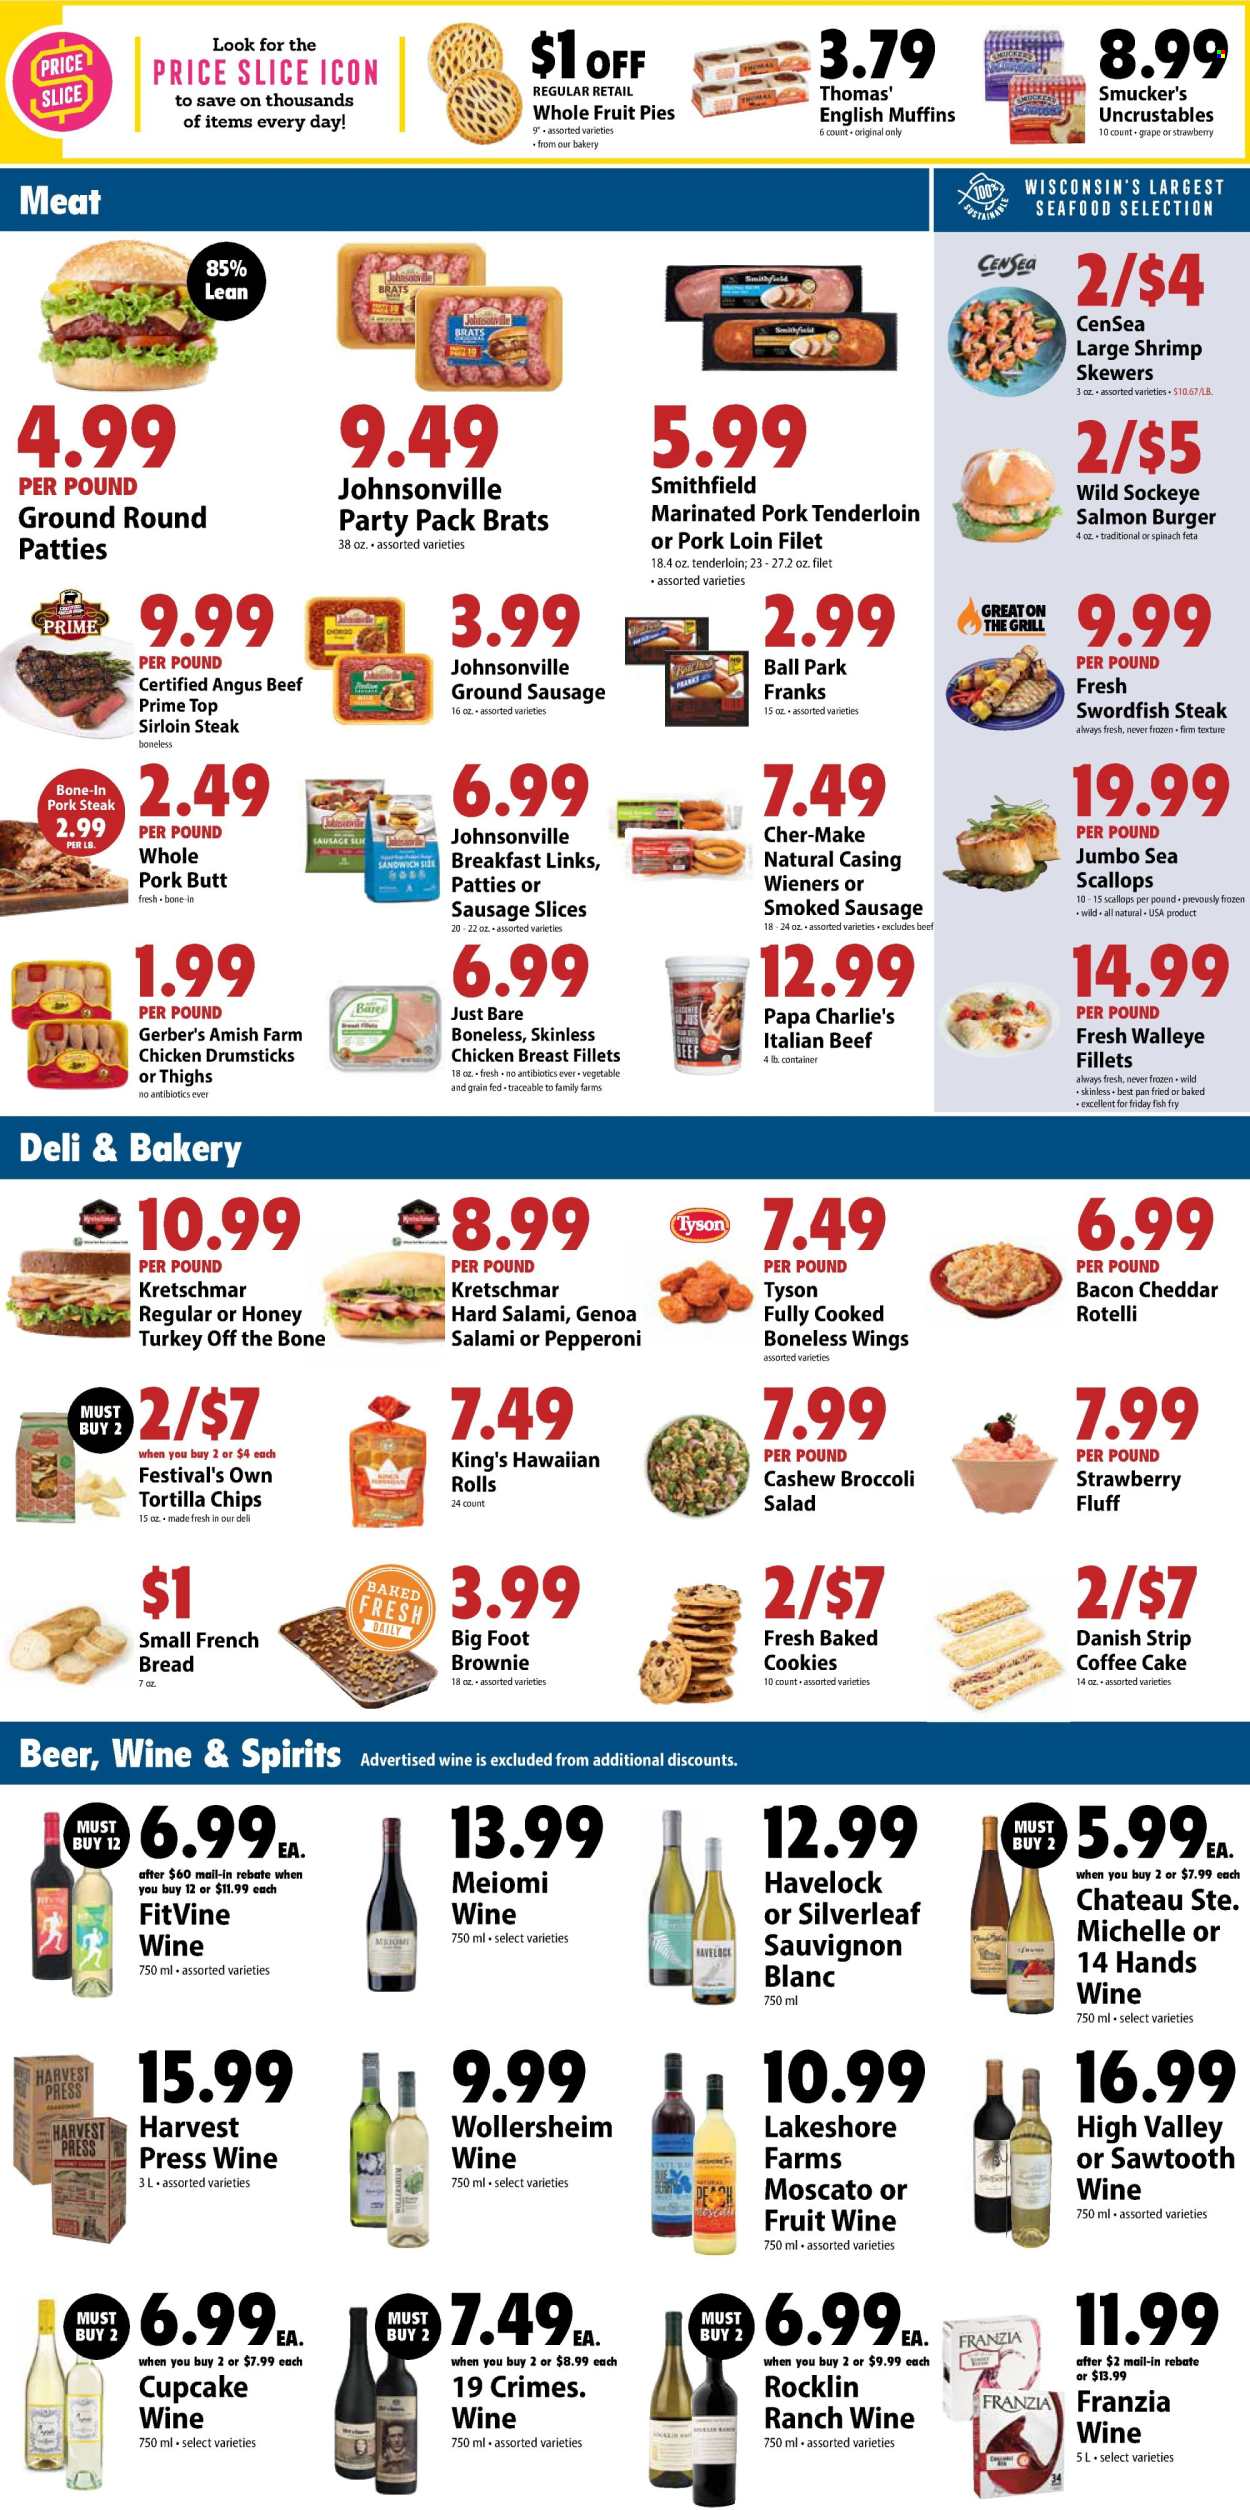 thumbnail - Festival Foods Flyer - 07/03/2024 - 07/09/2024 - Sales products - english muffins, cake, pie, french bread, hawaiian rolls, brownies, coffee cake, salad, scallops, swordfish, seafood, shrimps, fried fish, walleye, shrimp skewers, hamburger, ready meal, salami, chicken breasts, Johnsonville, sausage, smoked sausage, sausage slices, frankfurters, cookies, tortilla chips, red wine, white wine, wine, alcohol, Moscato, Sauvignon Blanc, Cupcake Vineyards, fruit wine, beer, chicken thighs, chicken drumsticks, turkey, beef sirloin, ground beef, steak, sirloin steak, pork chops, pork loin, pork meat, pork tenderloin, marinated pork, pork butt. Page 2.